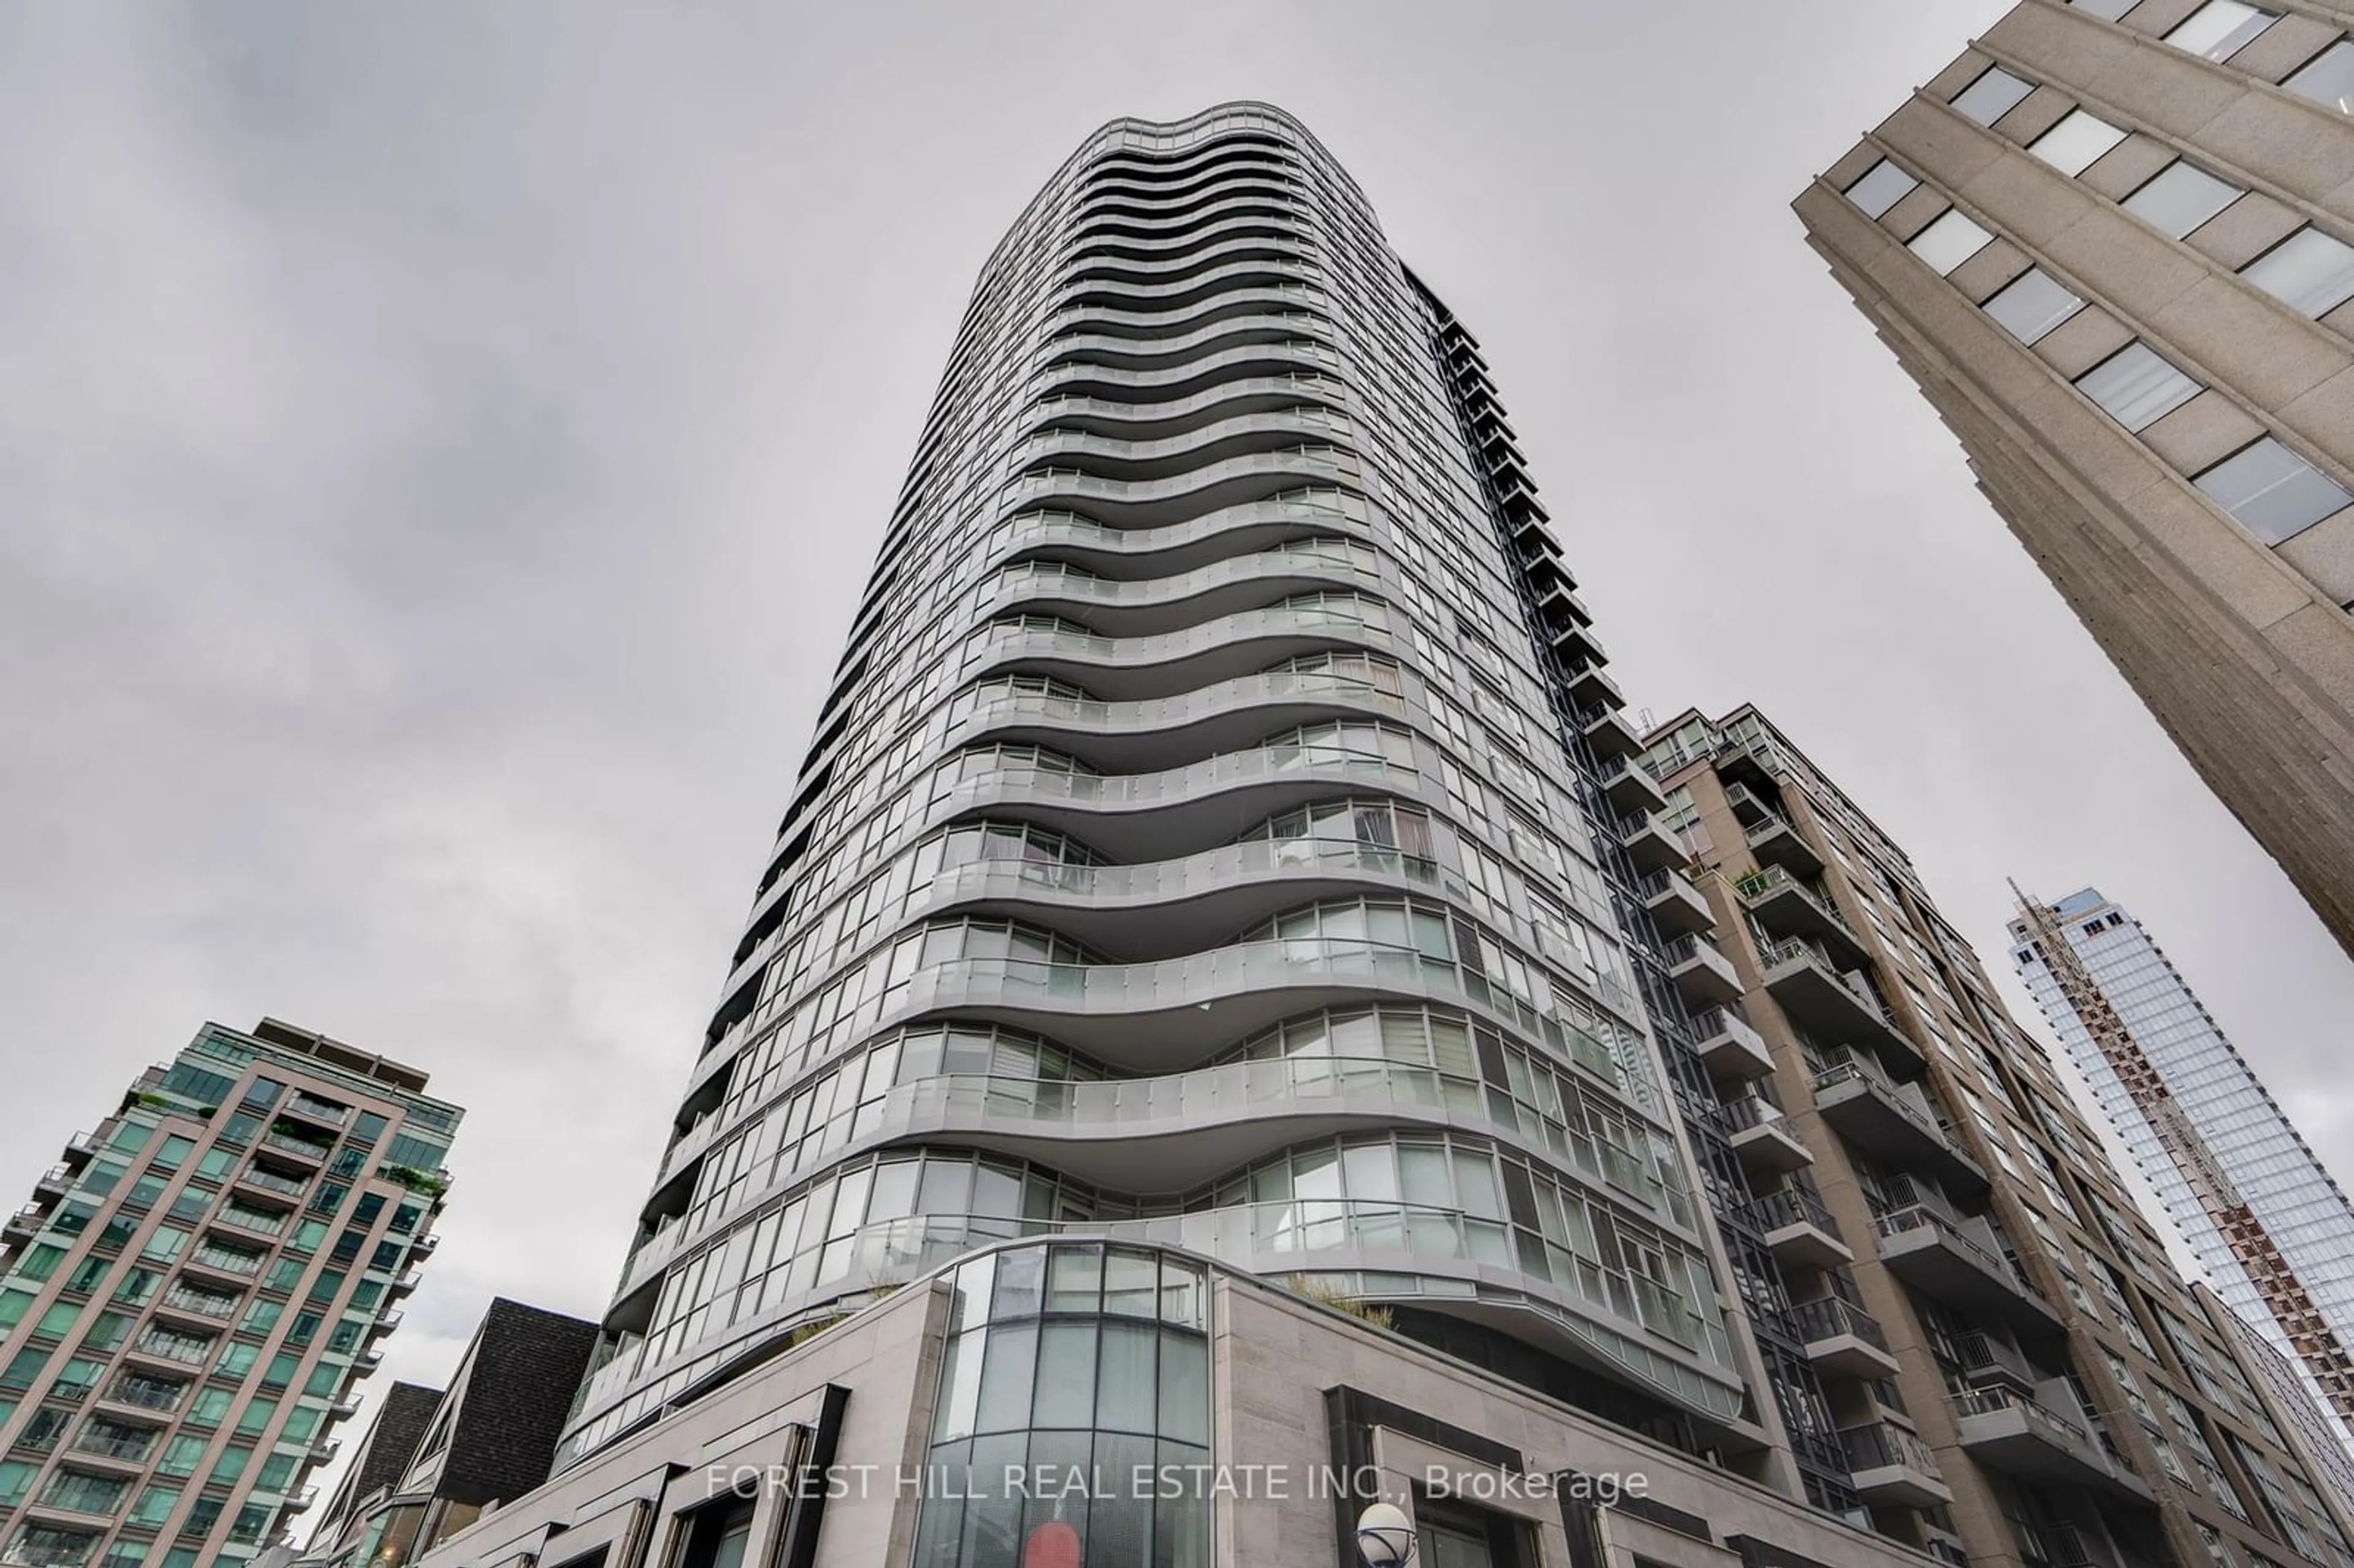 A pic from exterior of the house or condo for 88 cumberland St #605, Toronto Ontario M5R 1A3